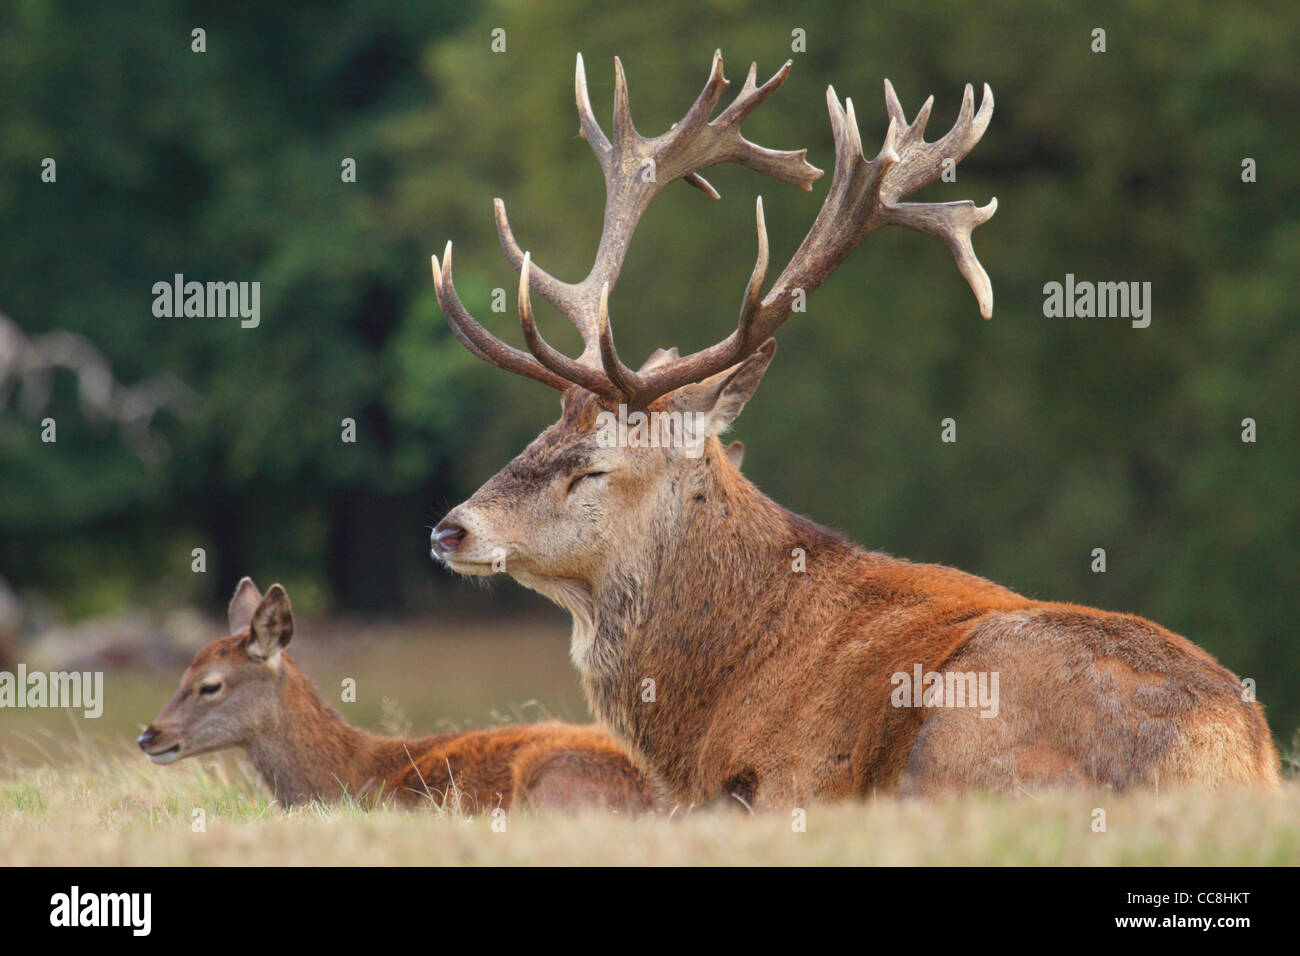 Red stag deer dozing in grass next to calf Stock Photo